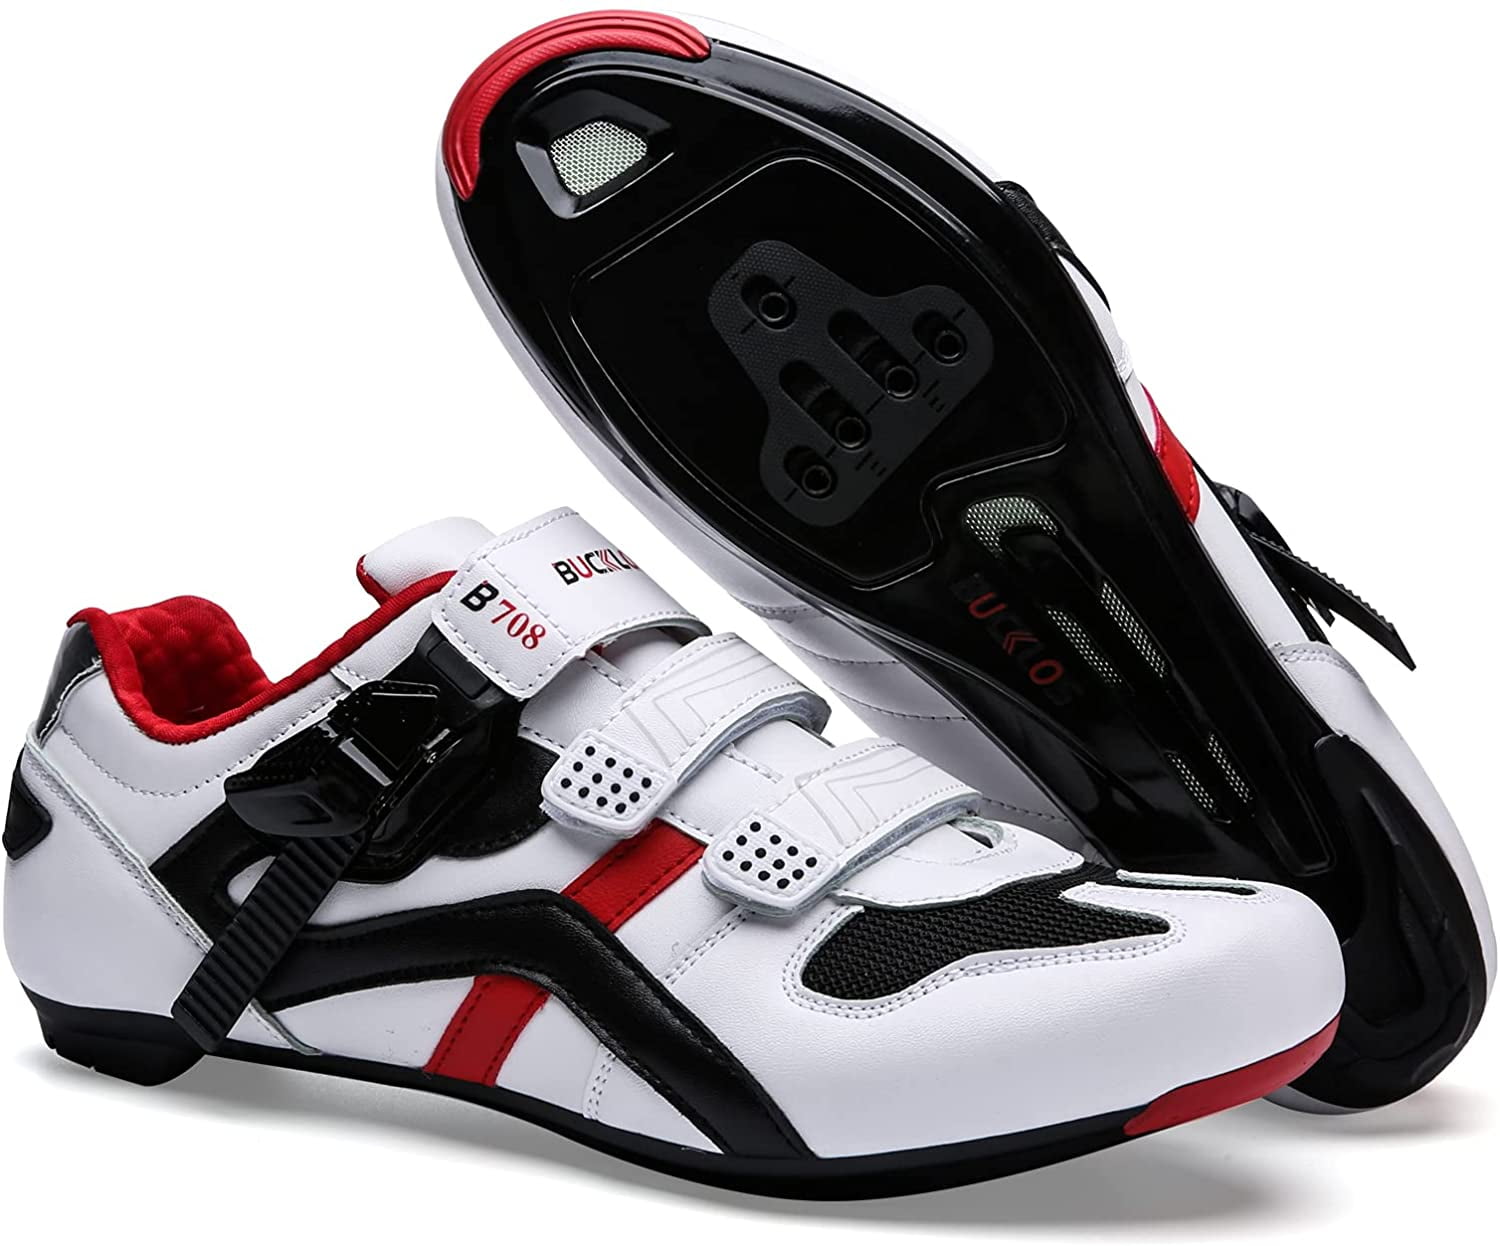 Road Cycling Shoes Breathable Comfortable and Wear Resistant Outdoor/Indoor Cycling Shoes Compatible with SPD/SPD-SL Men and Women PKQIU Cycling Shoes Bike Shoes Buckle Cycling Shoes Road Racing Shoes 